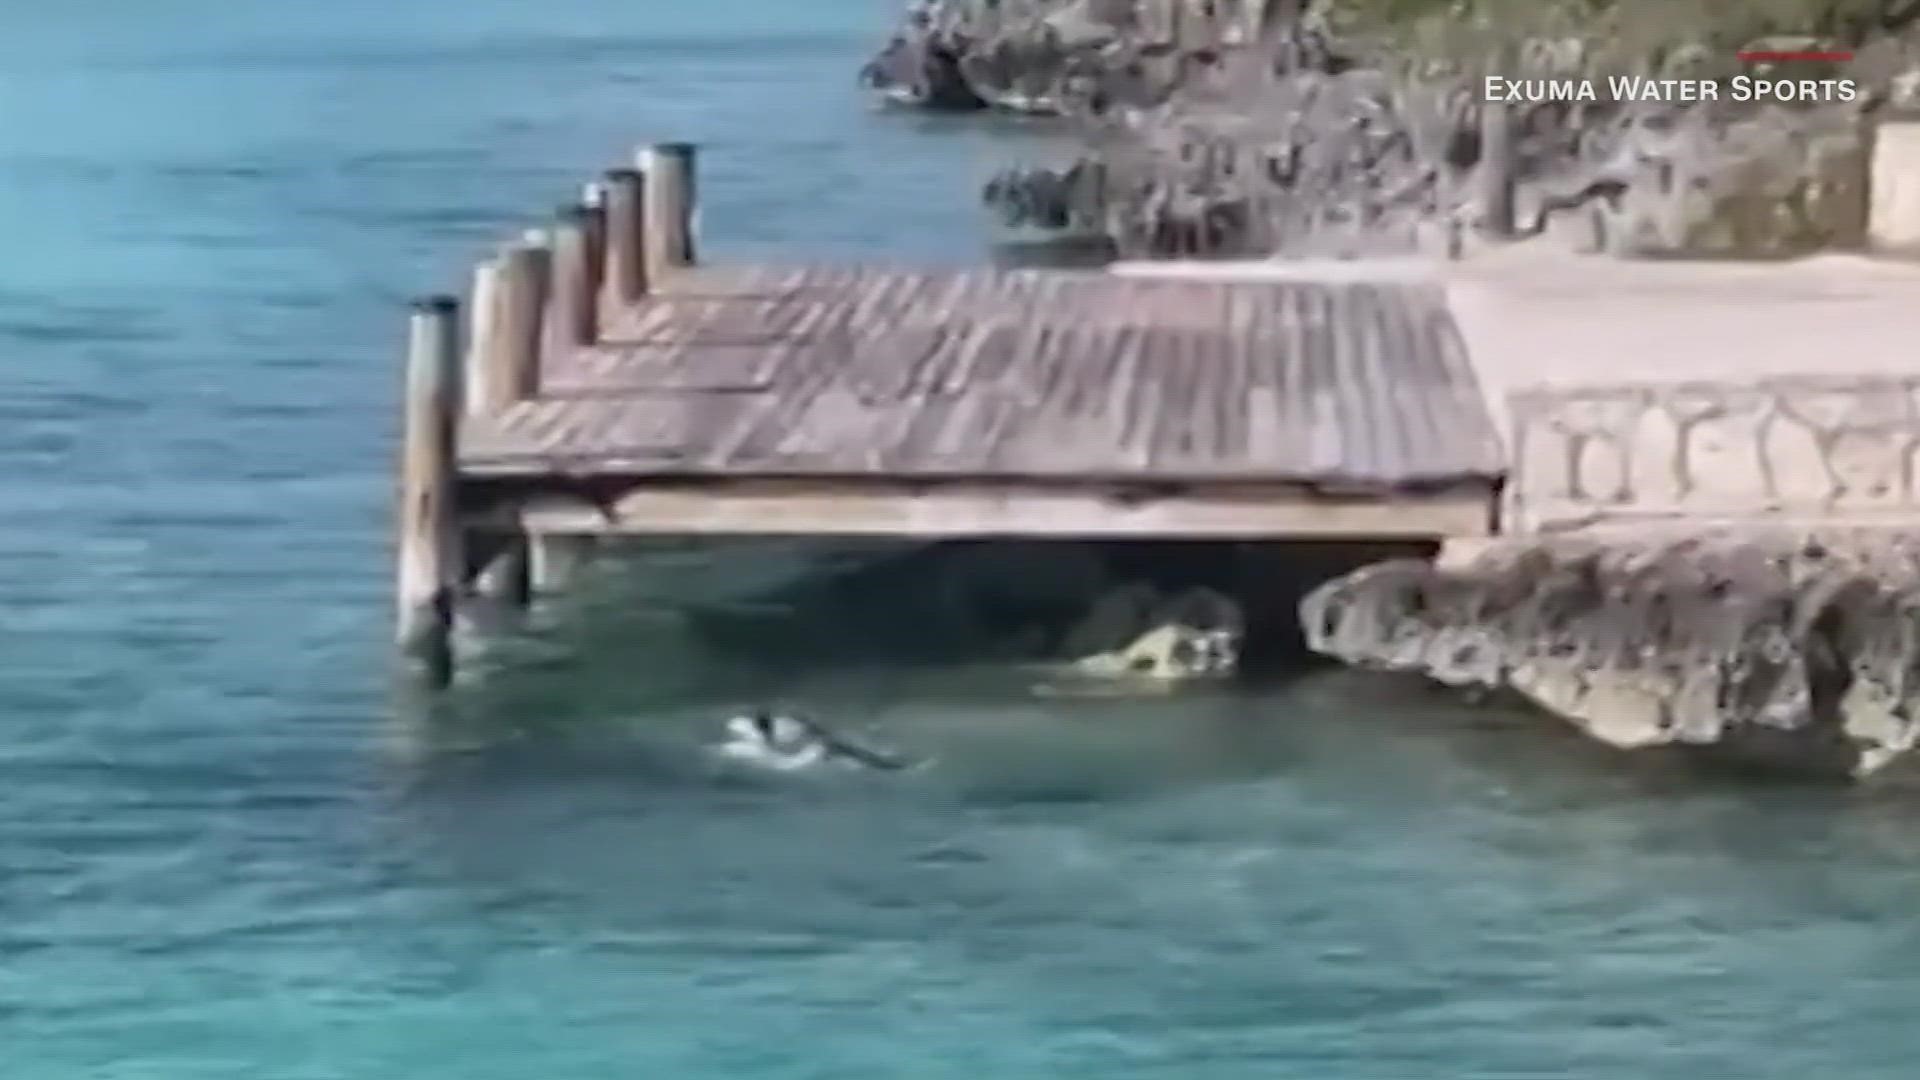 Tourists in the Bahamas witnessed a rare standoff between a dog and a shark and it was all caught on camera.